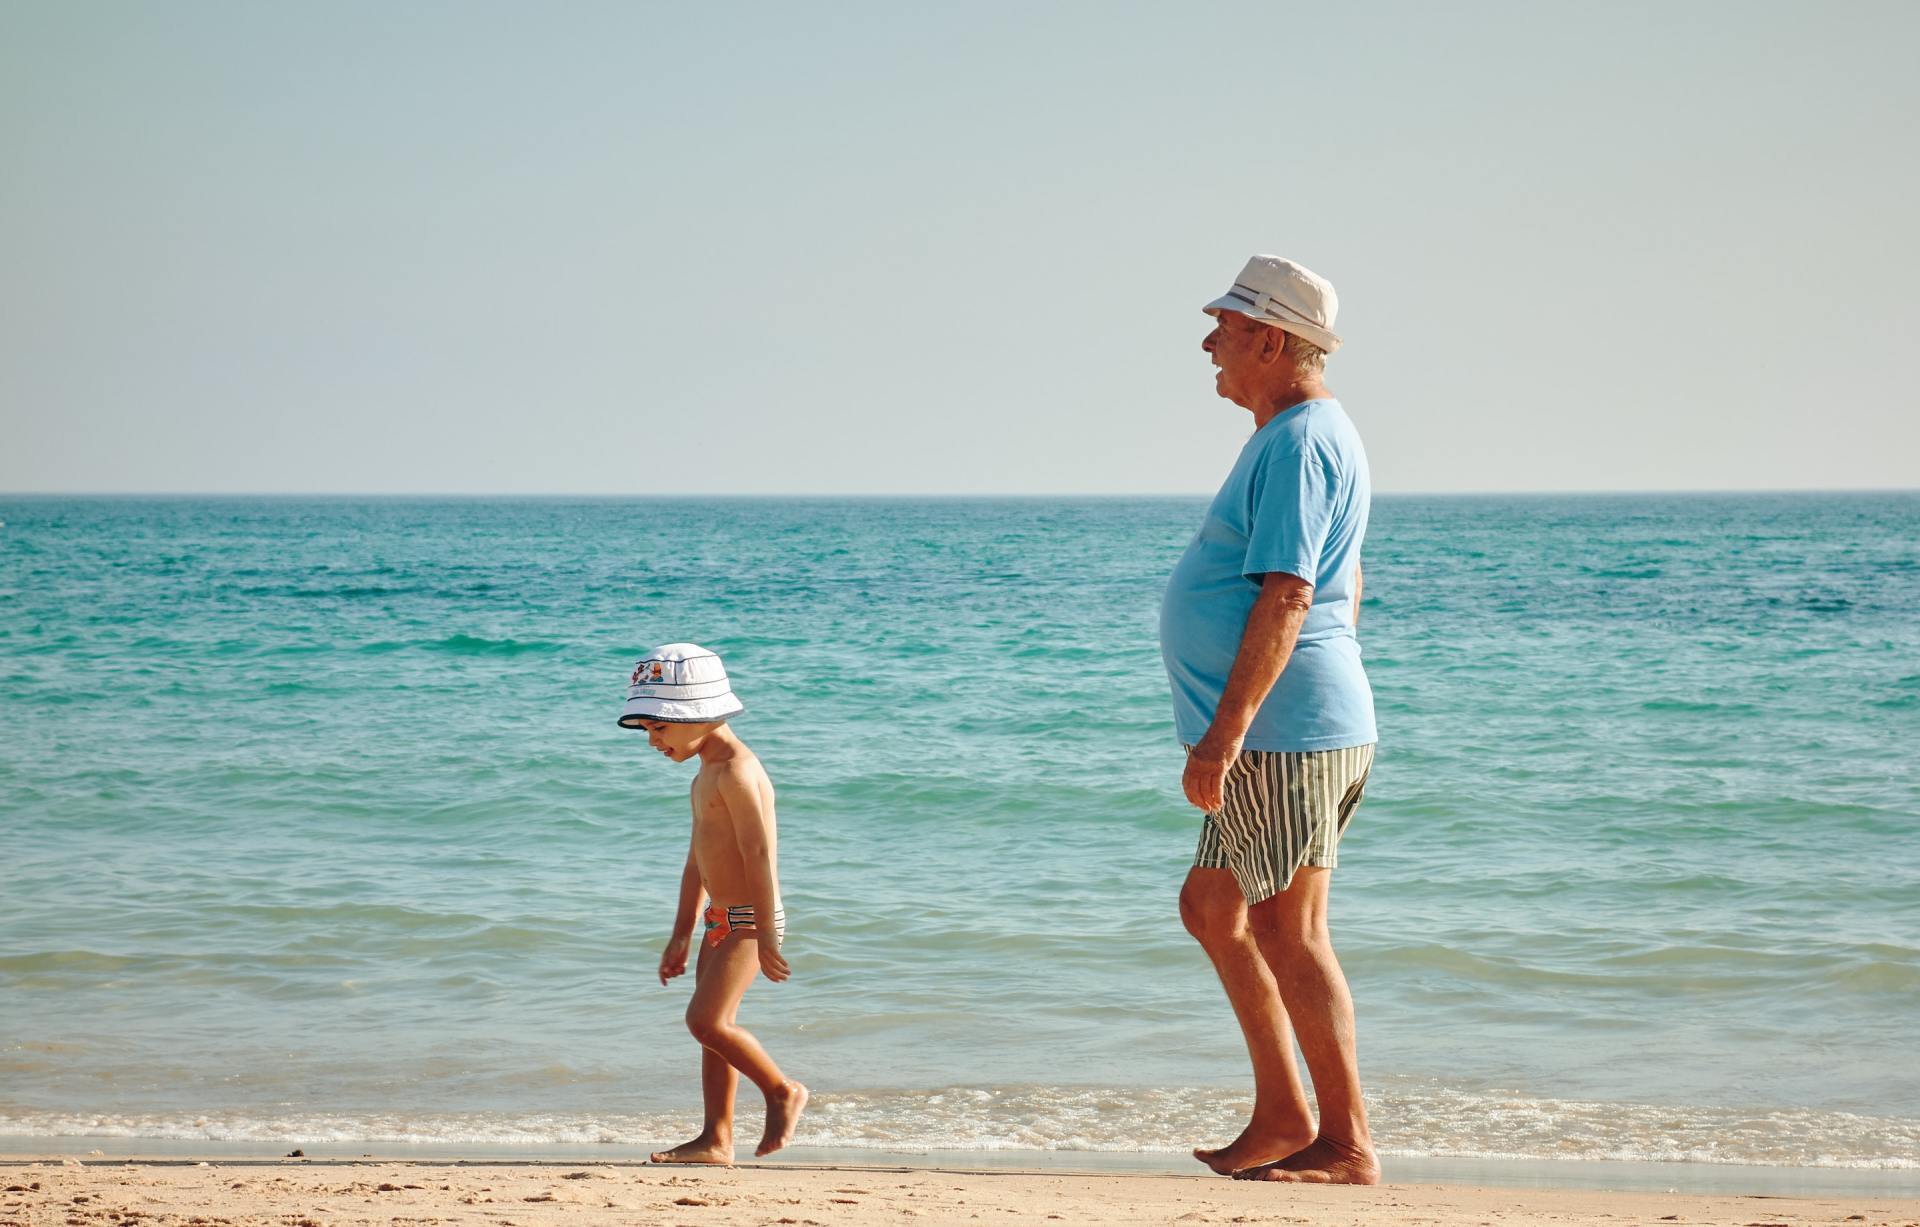 Older man probably grandfather walking on oceanside beach with younger boy probably grandson.